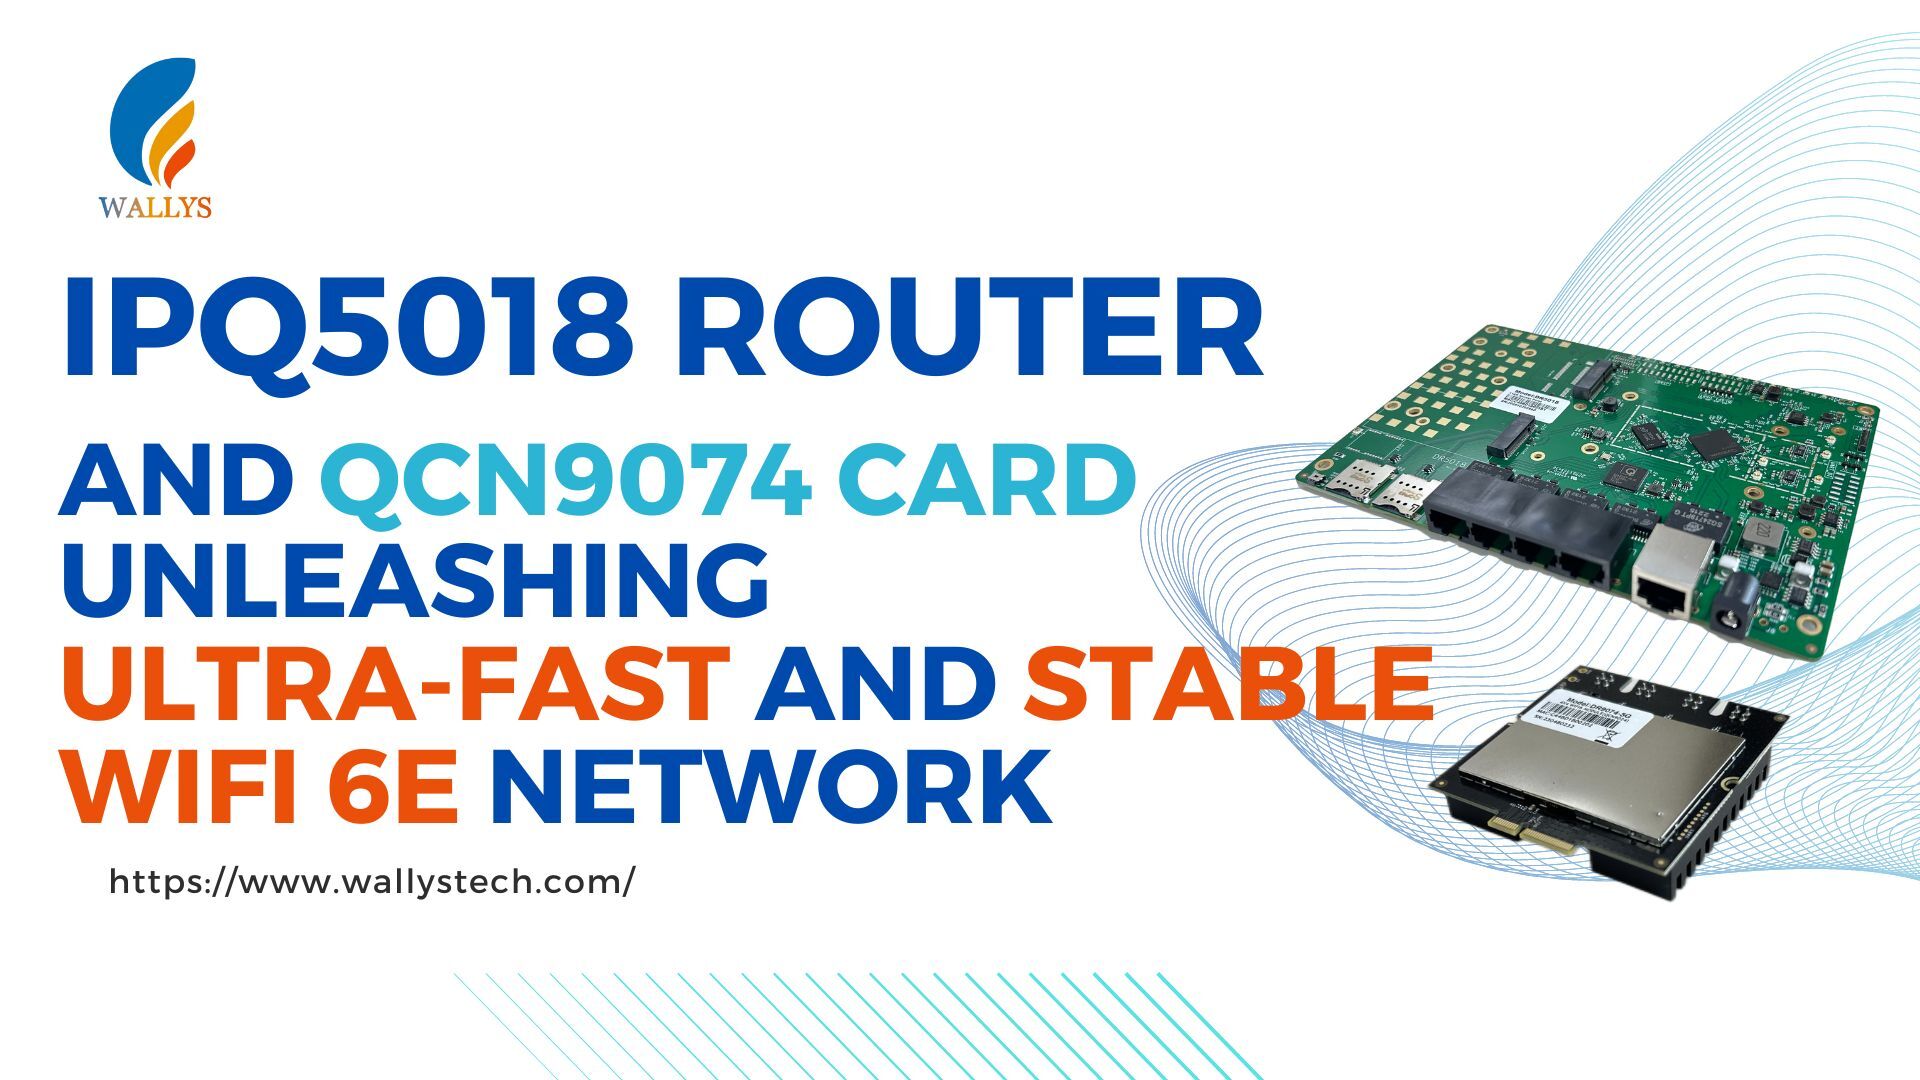 IPQ5018 Router and QCN9074 Card: Unleashing Ultra-Fast and Stable WiFi 6E Network